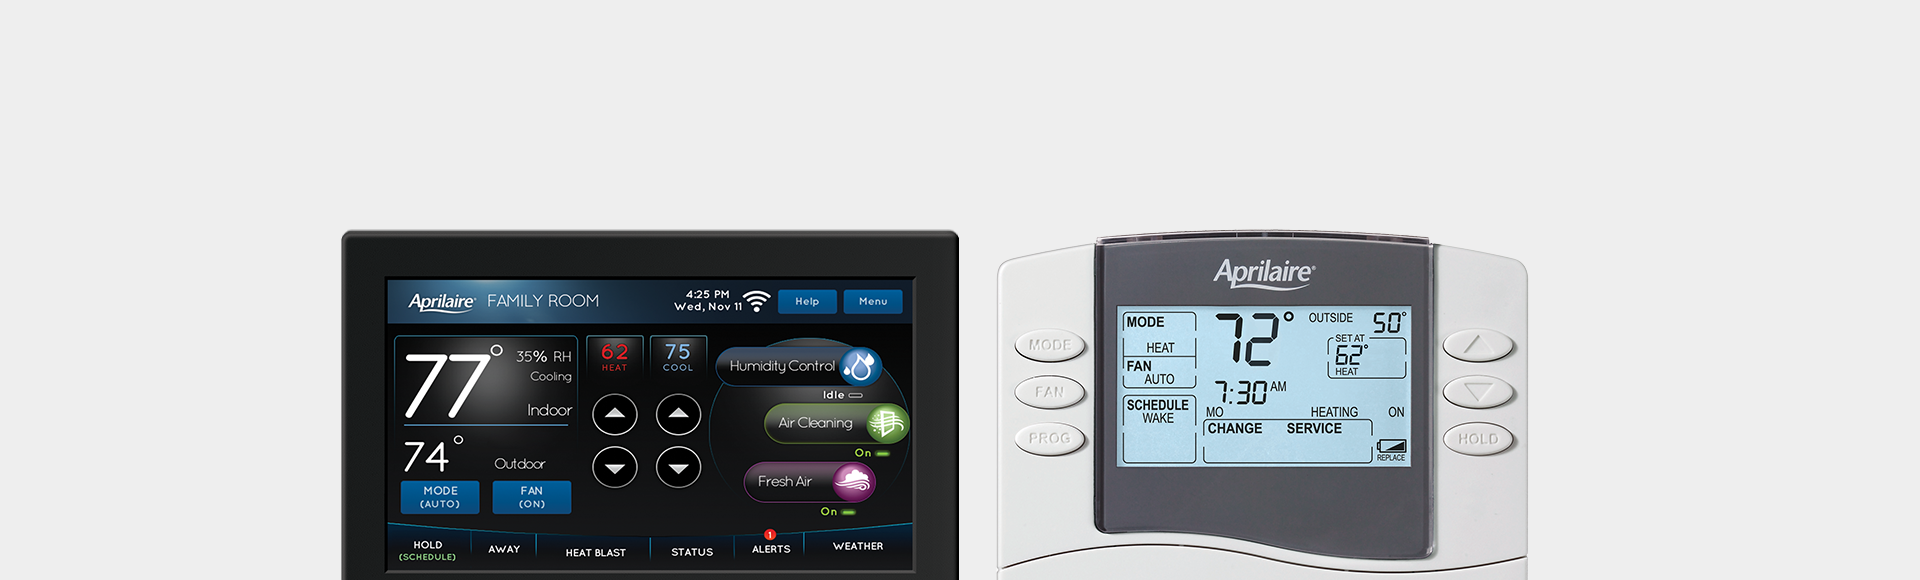 Aprilaire Whole-House Thermostats